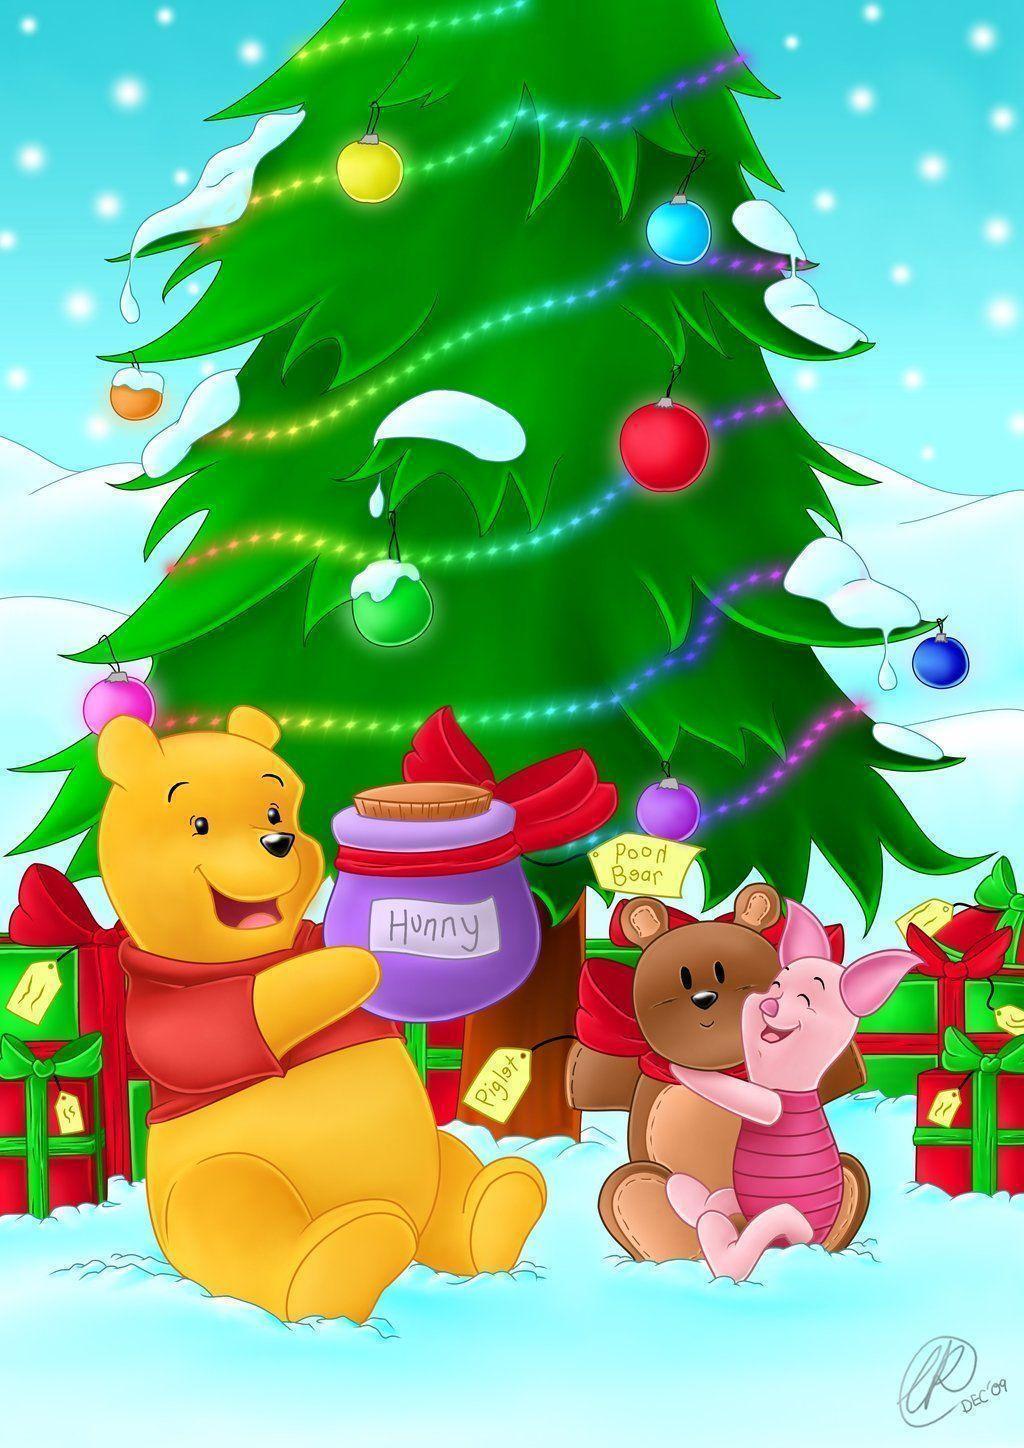 Xmas Stuff For > Winnie The Pooh And Friends Christmas